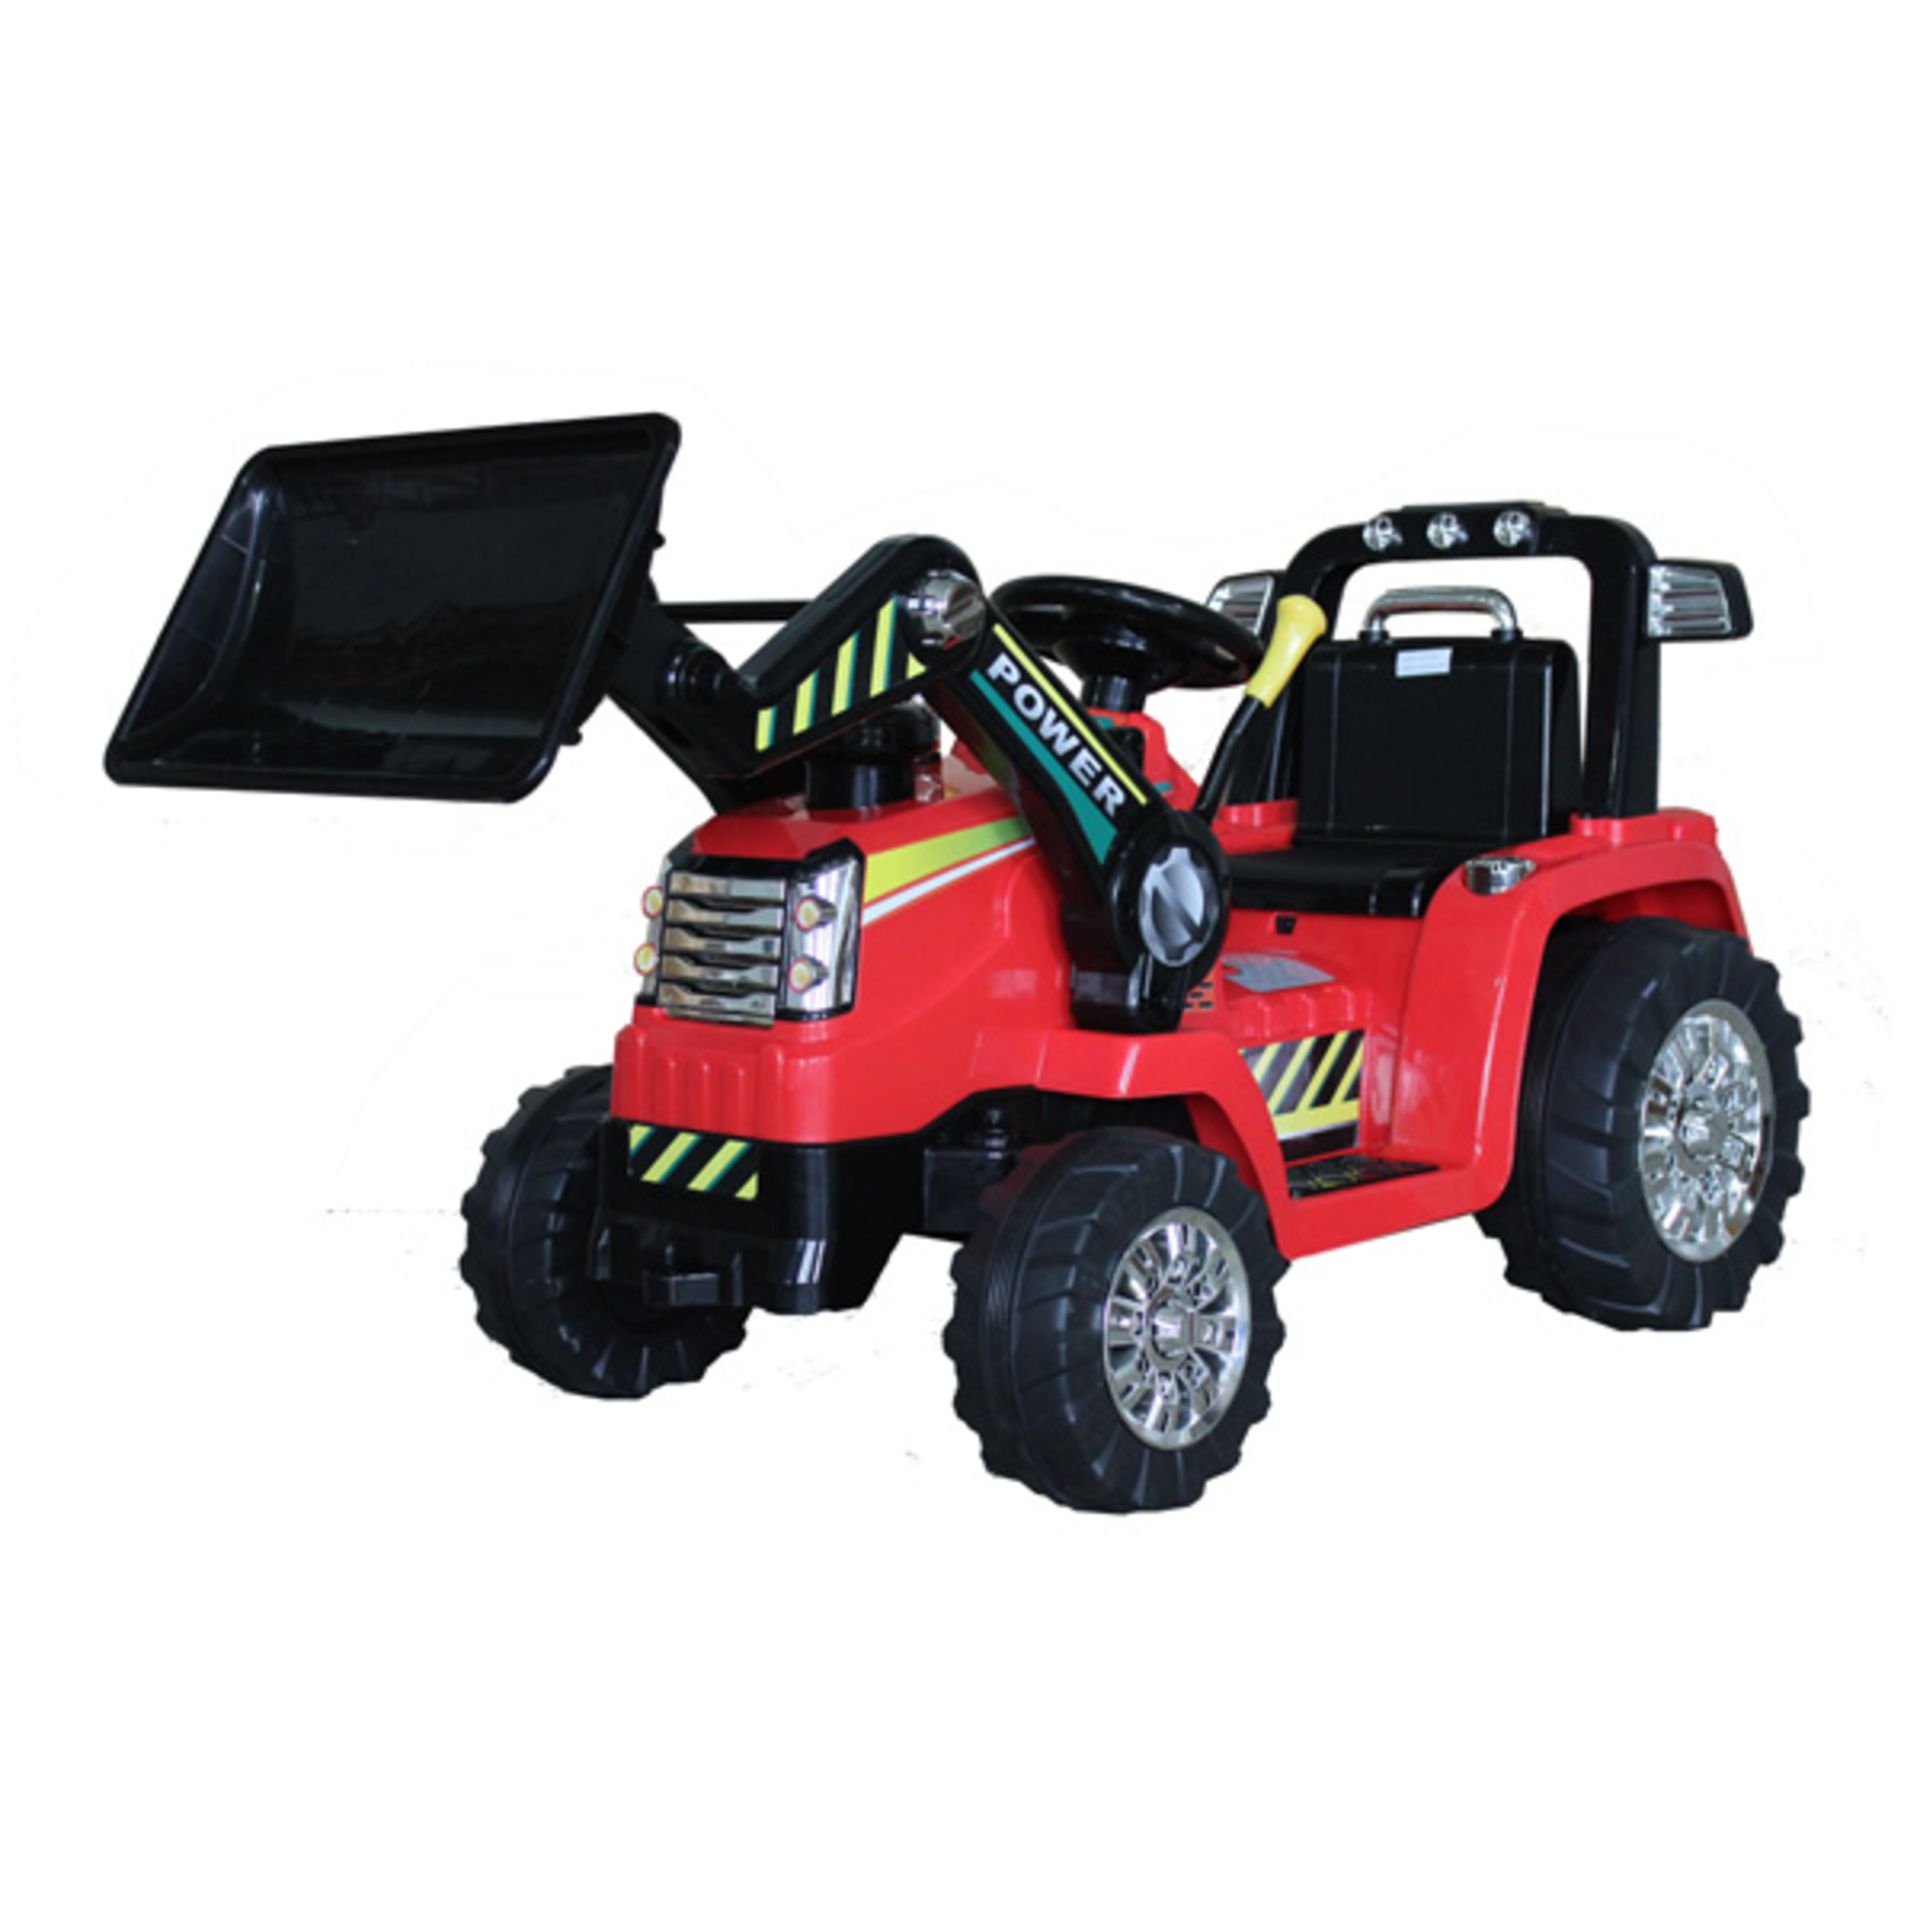 Brand New Ride On Farm Tractor 12v with front loader - Red - Image 2 of 2